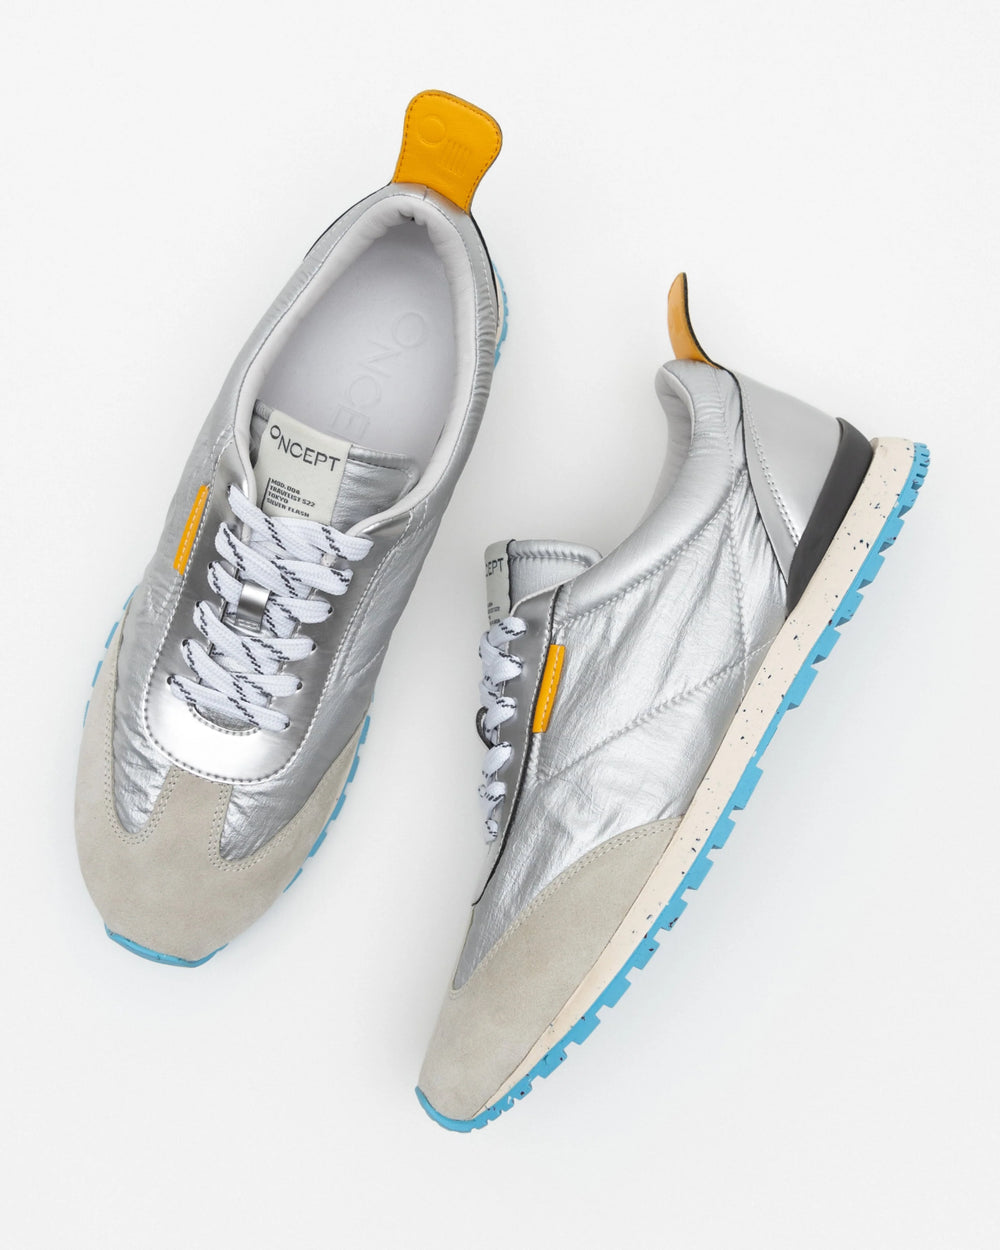 Oncept - Tokyo Sneaker in metallic is a great addition to your everyday sneaker collection. These sustainable water resistant nylon, chrome free suede, re-speckled midsole and tencel twill linings add the conscious effort to your wardrobe 